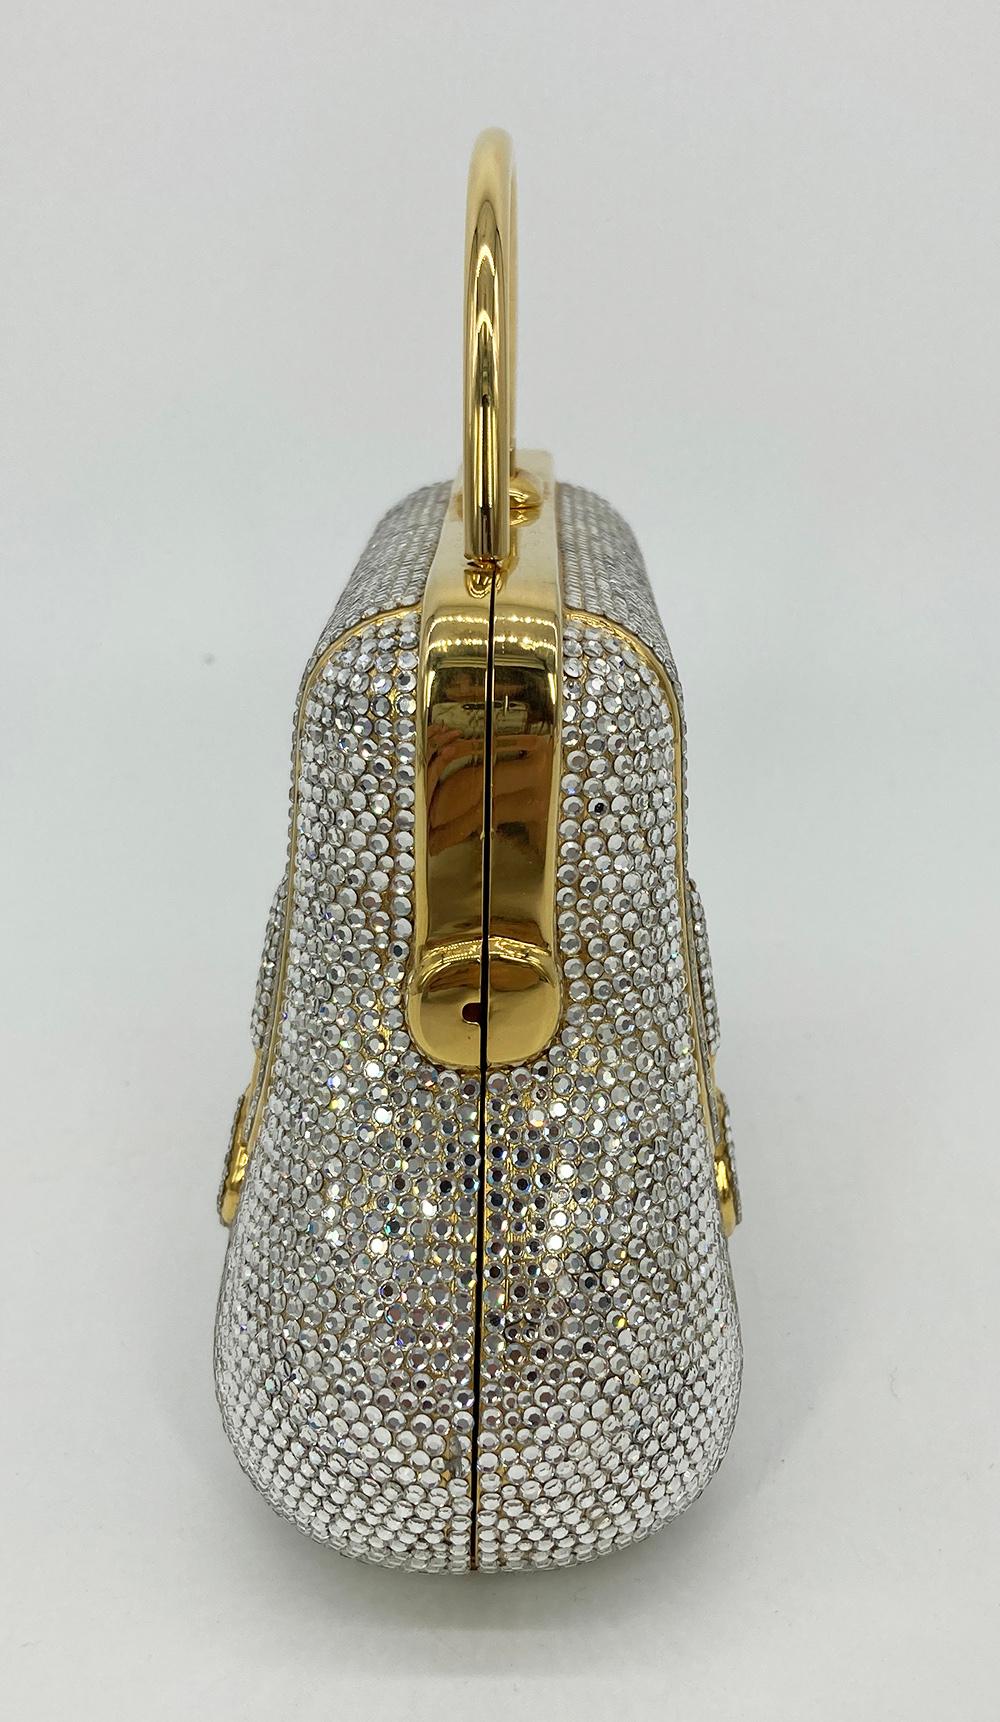 Vintage Judith Leiber Top Handle Swarovski Crystal Minaudiere in excellent condition. Unique mini briefcase design with solid metal curved top handle, clear swarovski crystals throughout and gold body. Top closure opens to a gold leather interior